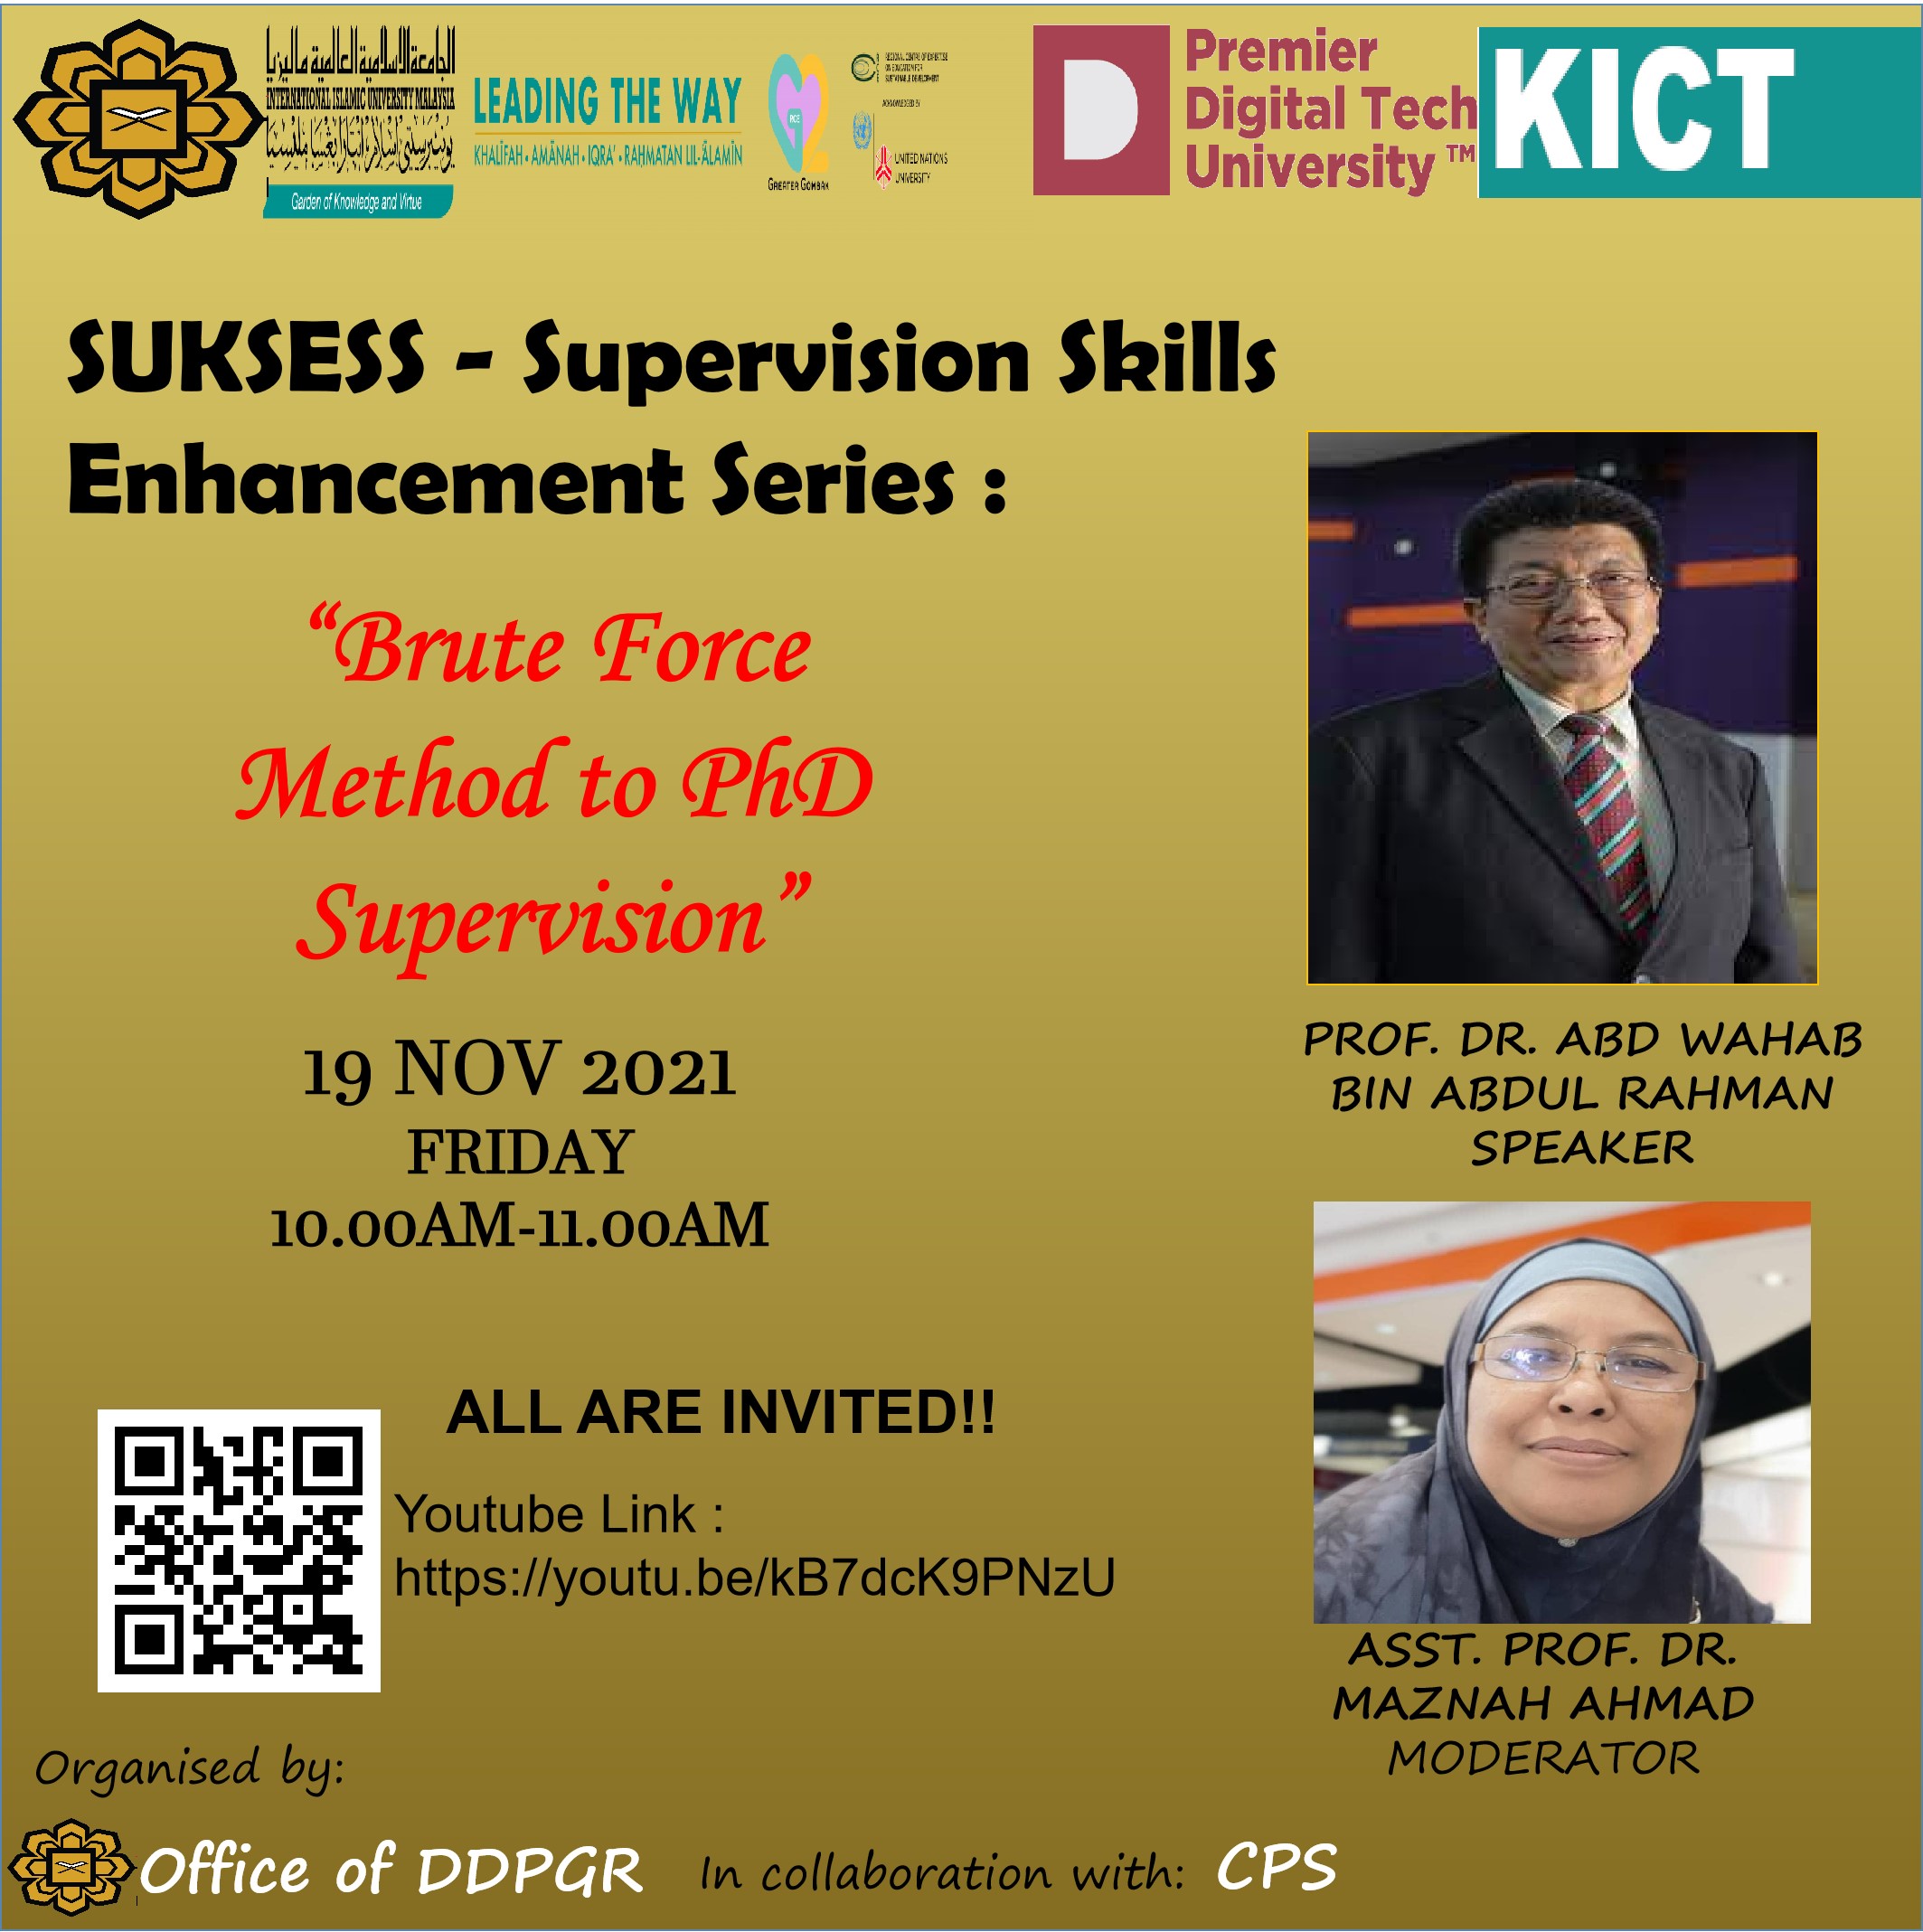 SUKSESS - Supervision Skills Enhancement Series titled "Brute Force Method to PhD Supervision"